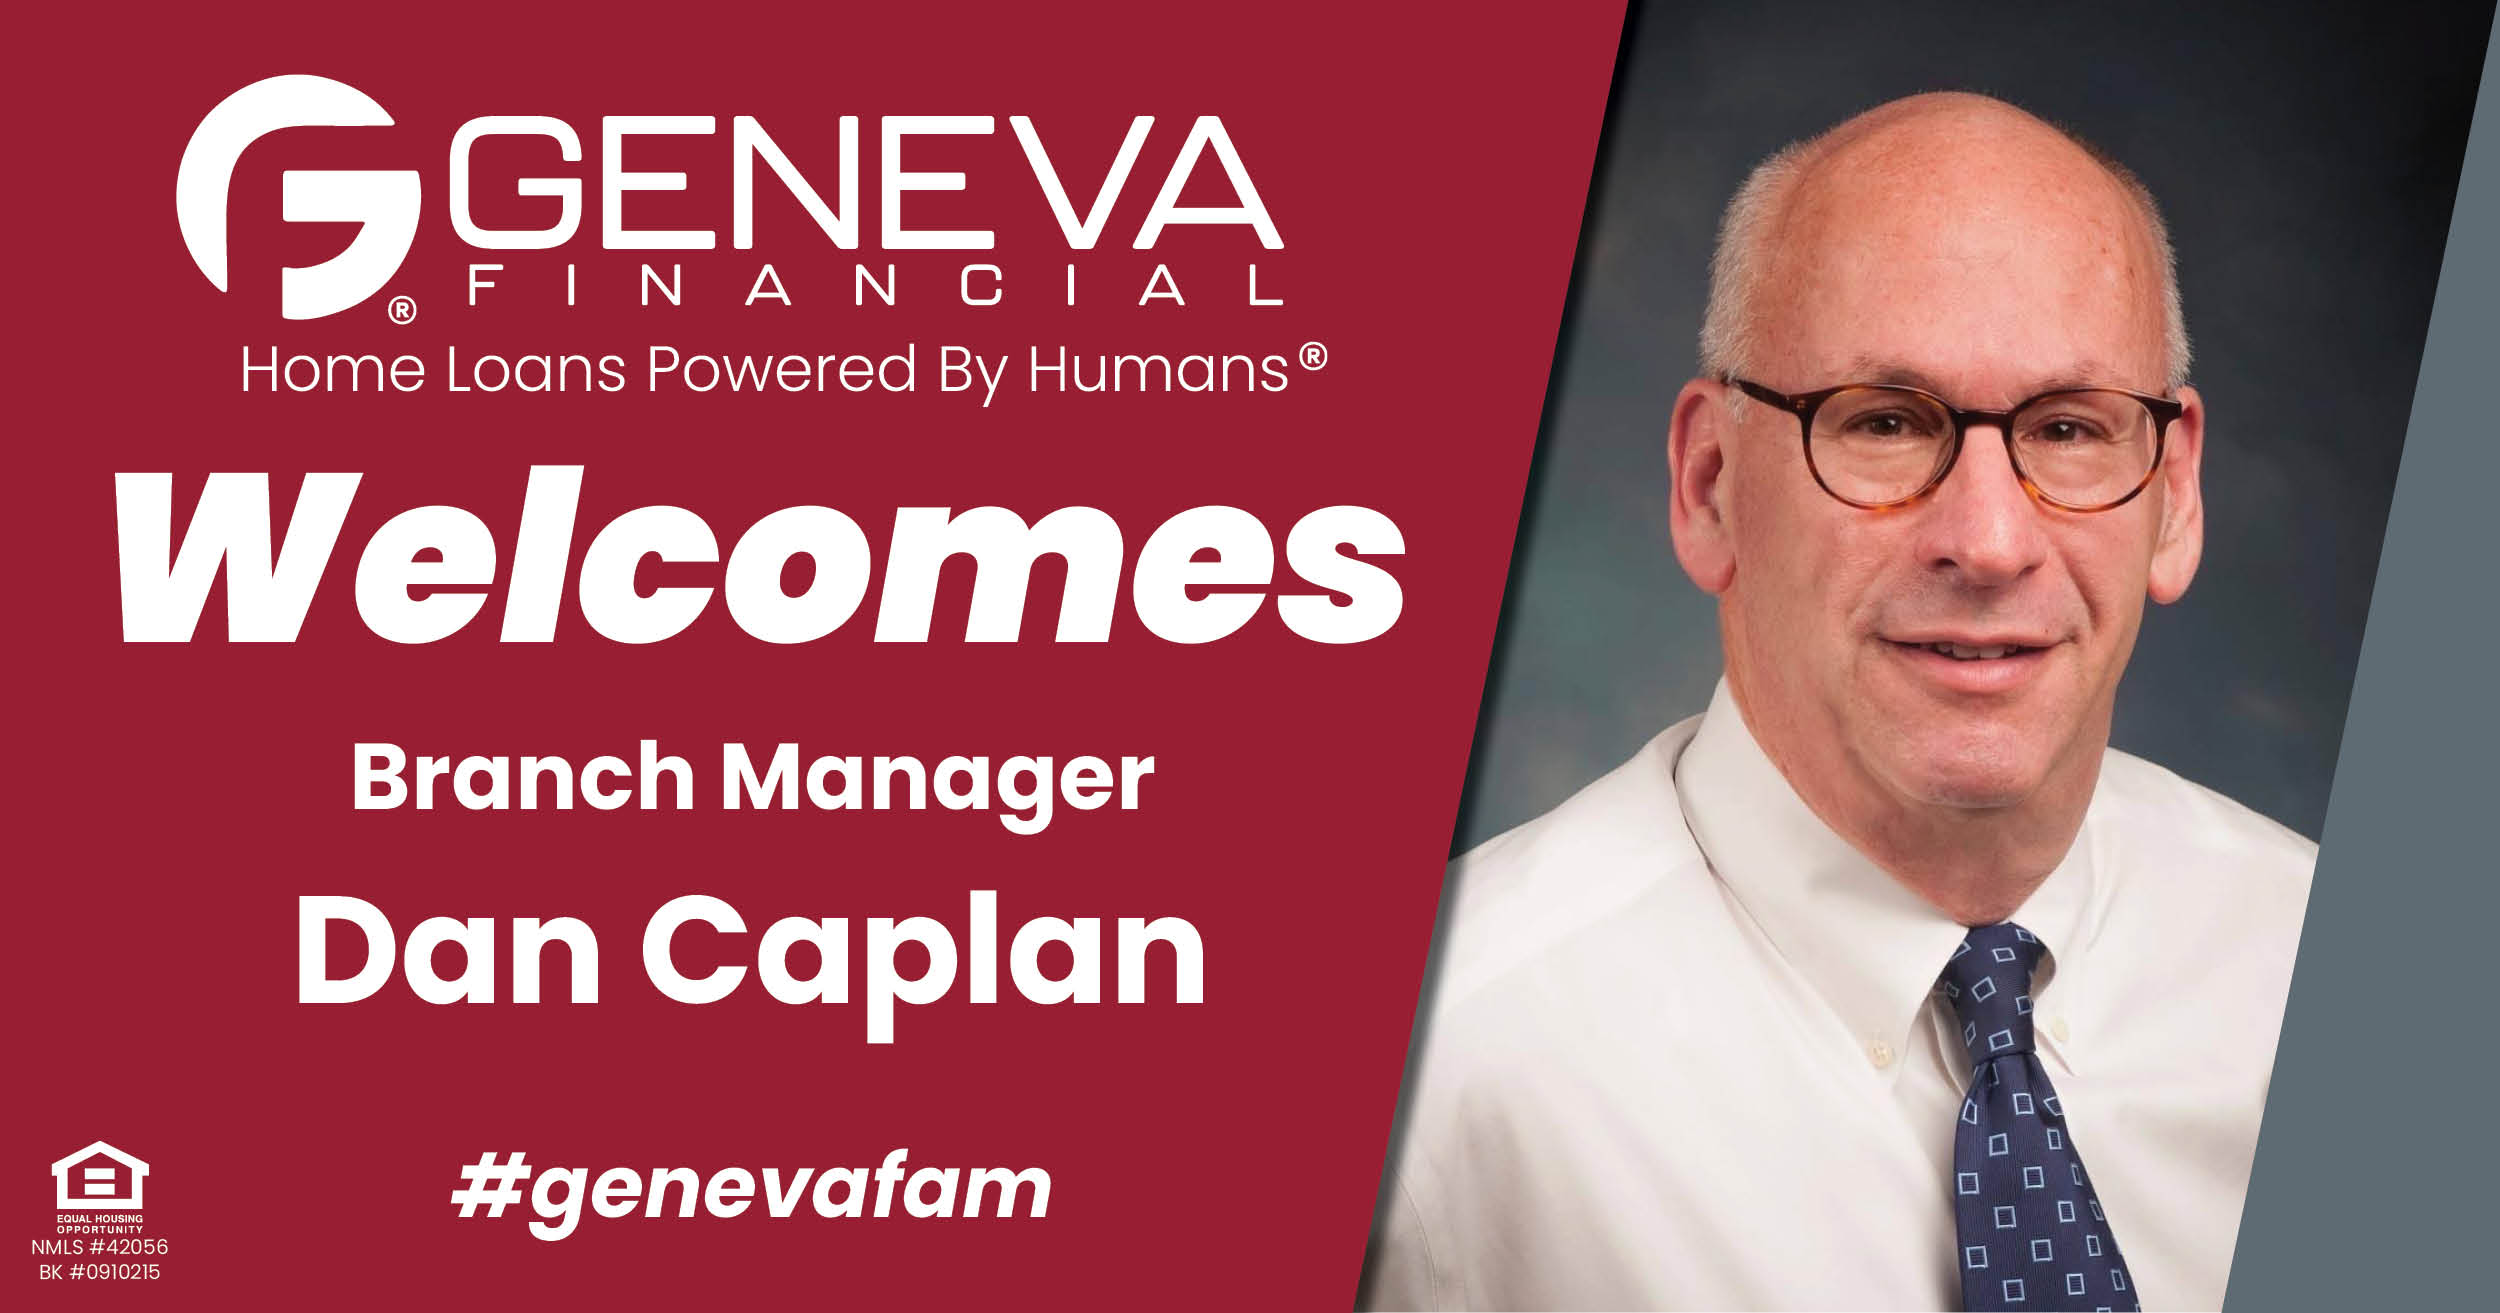 Geneva Financial Welcomes New Branch Manager Dan Caplan to Bethesda, Maryland – Home Loans Powered by Humans®.